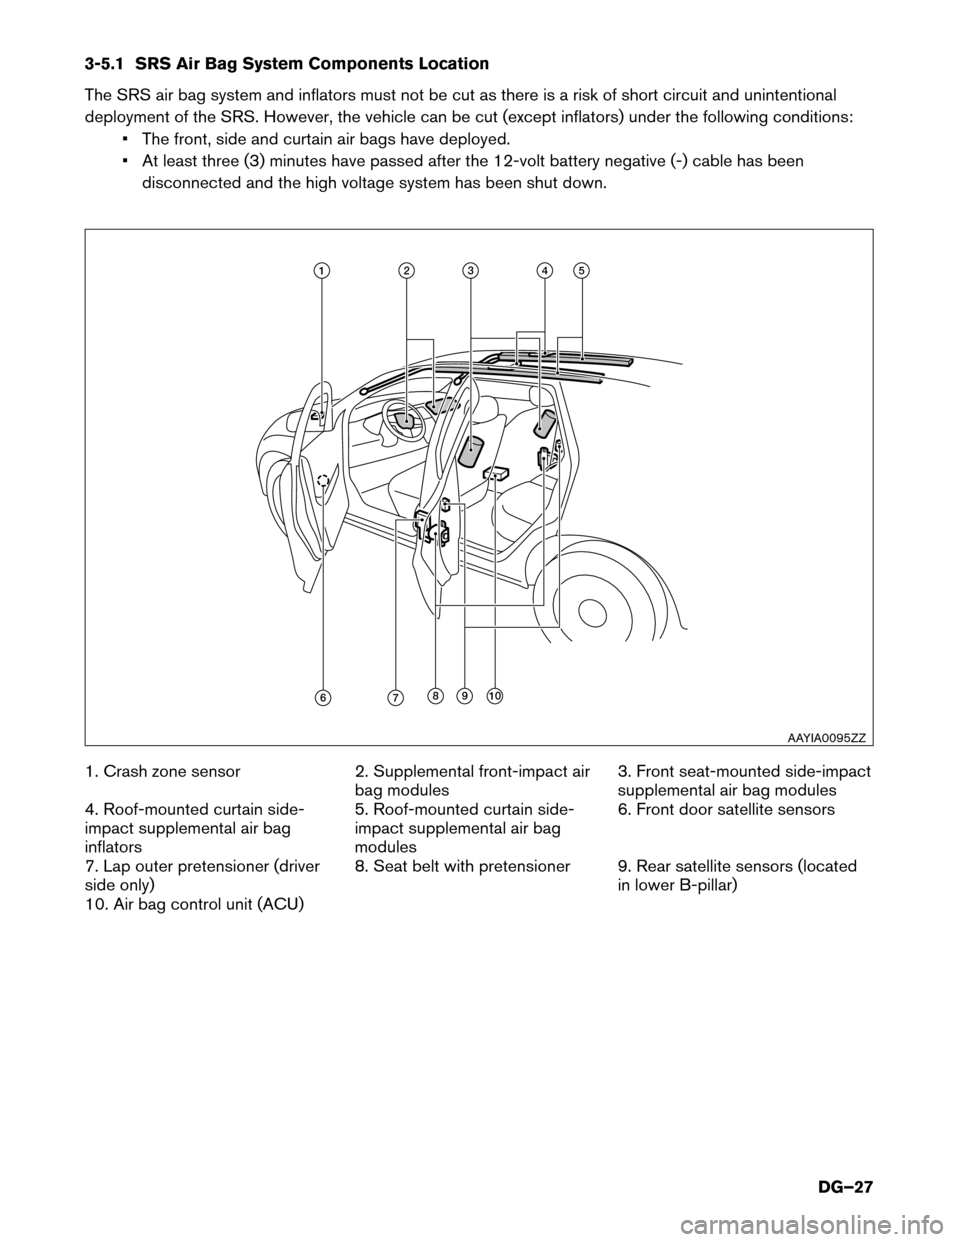 NISSAN LEAF 2016 1.G Dismantling Guide 3-5.1 SRS Air Bag System Components Location
The
SRS air bag system and inflators must not be cut as there is a risk of short circuit and unintentional
deployment of the SRS. However, the vehicle can 